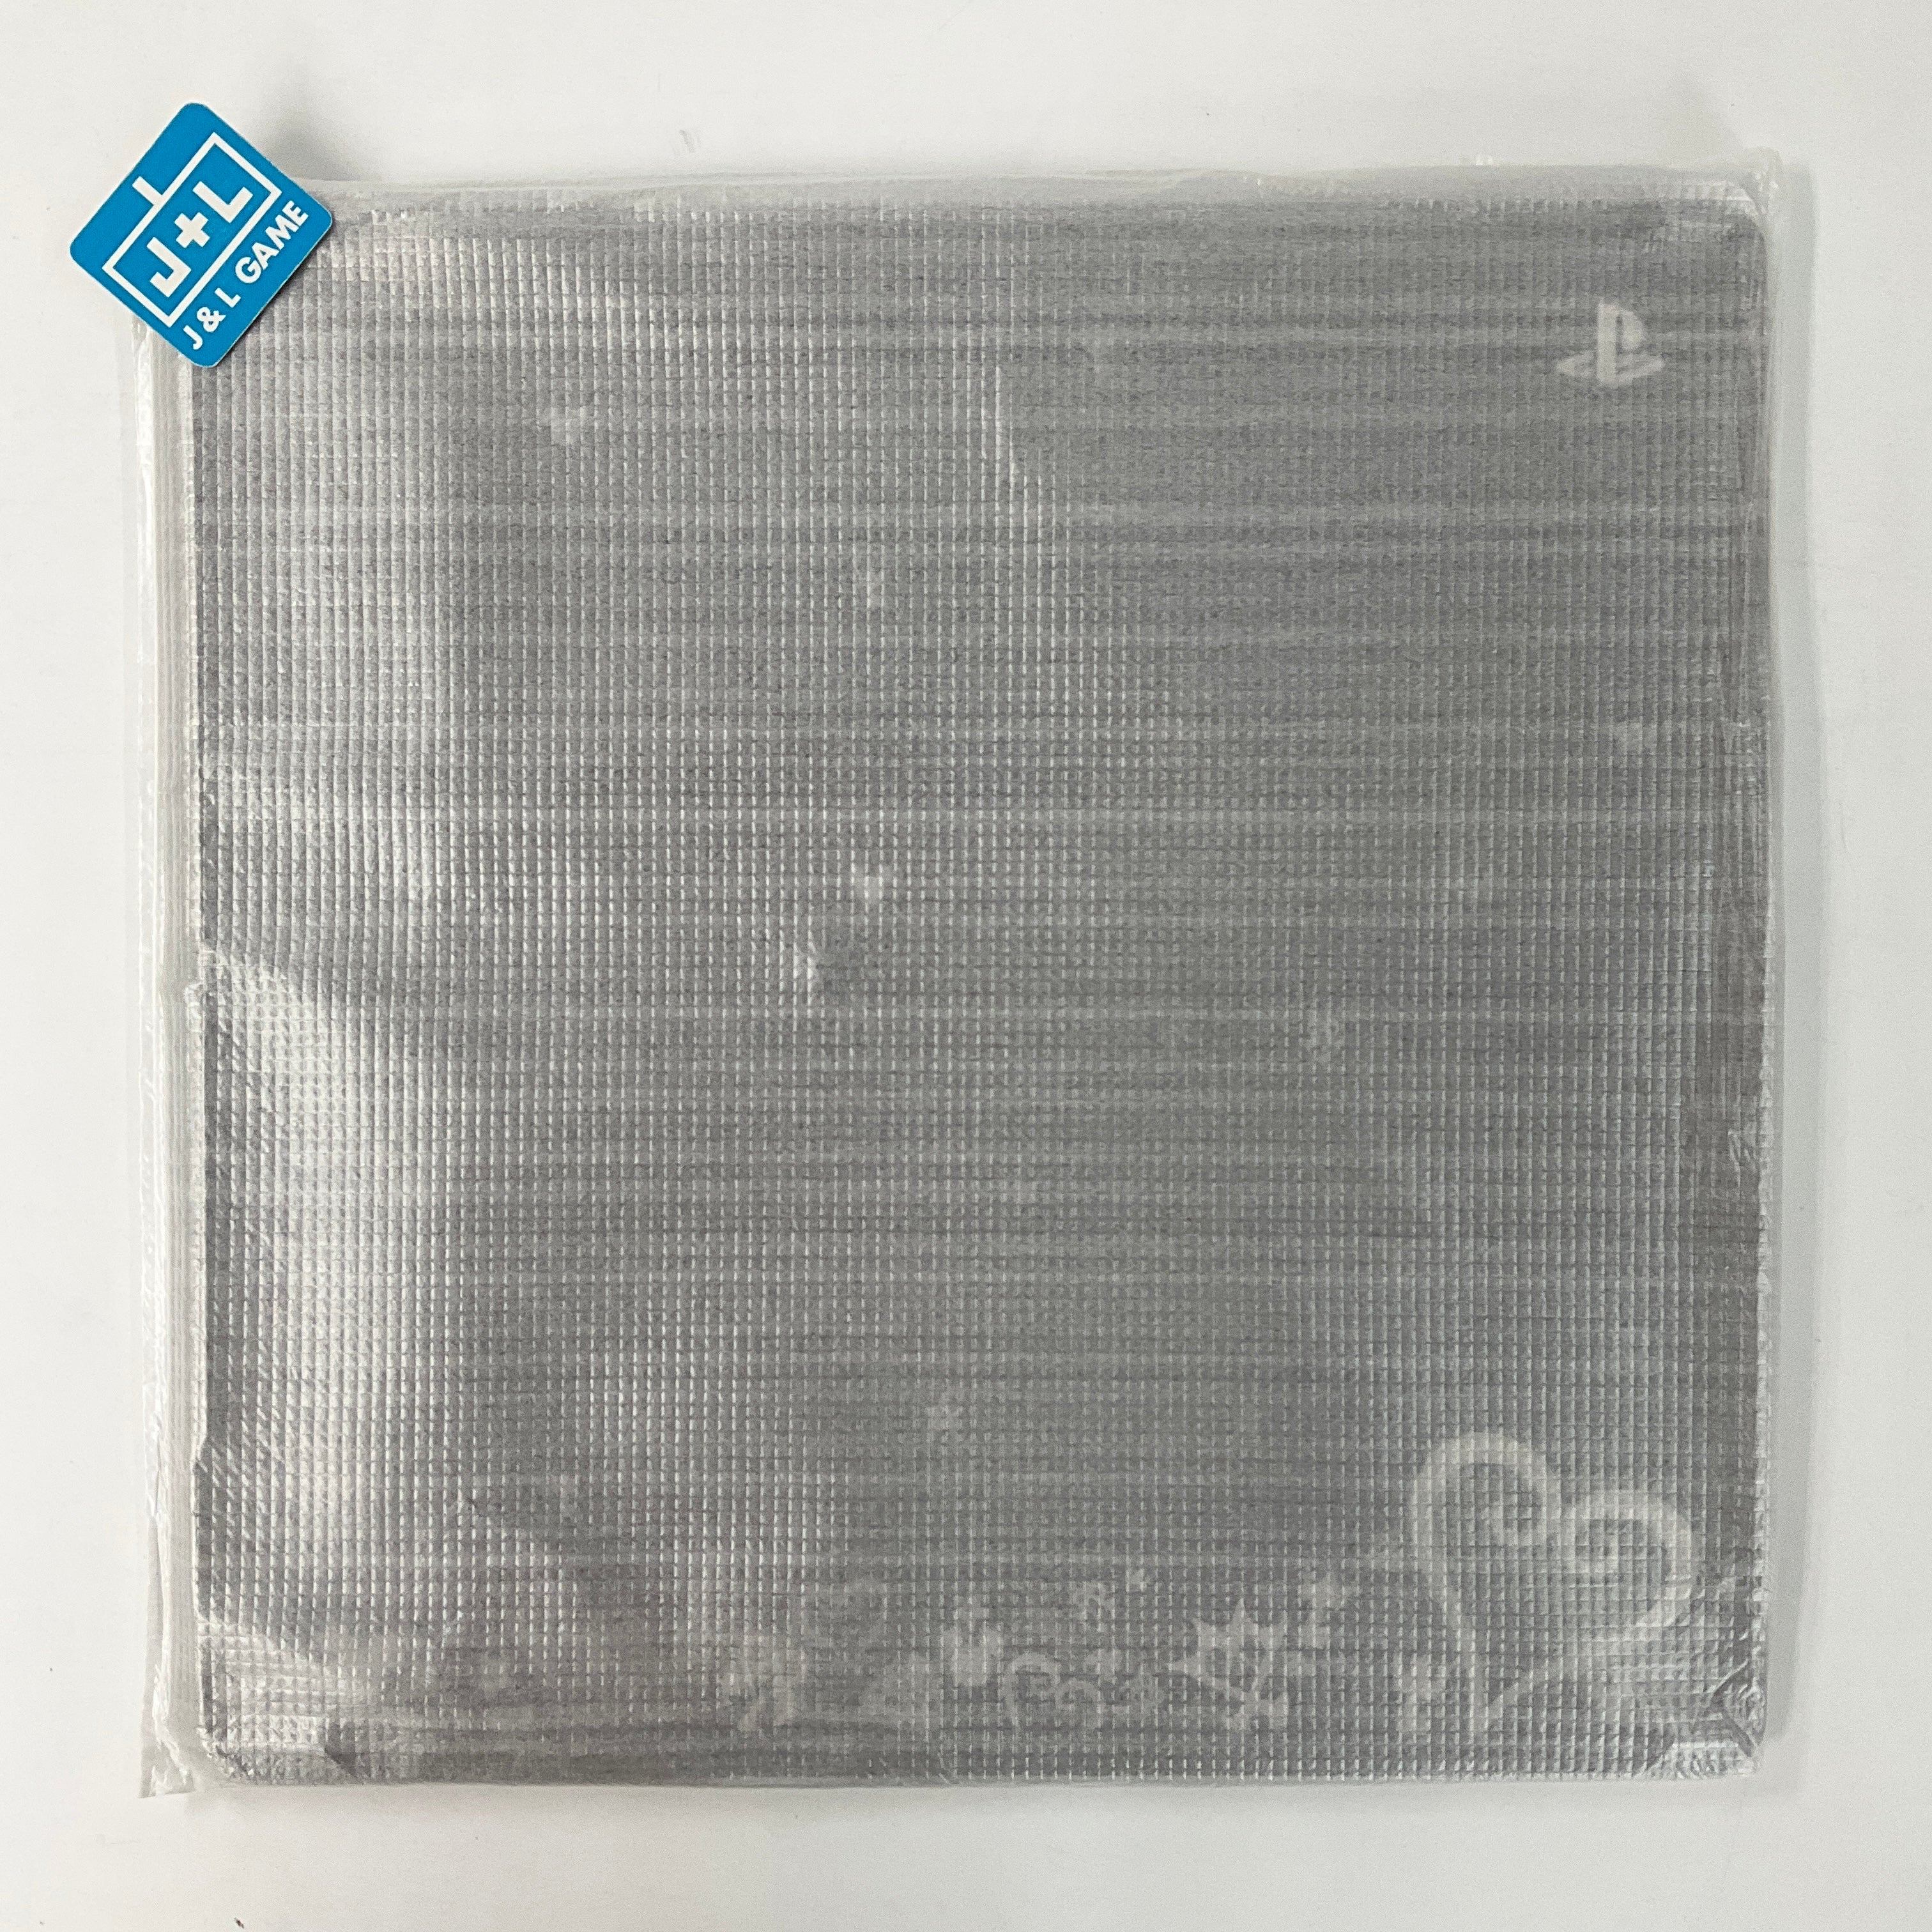 Kingdom Hearts 15th Anniversary Edition PS4 Slim Top Cover - (PS4) Playstation 4 Accessories Sony   